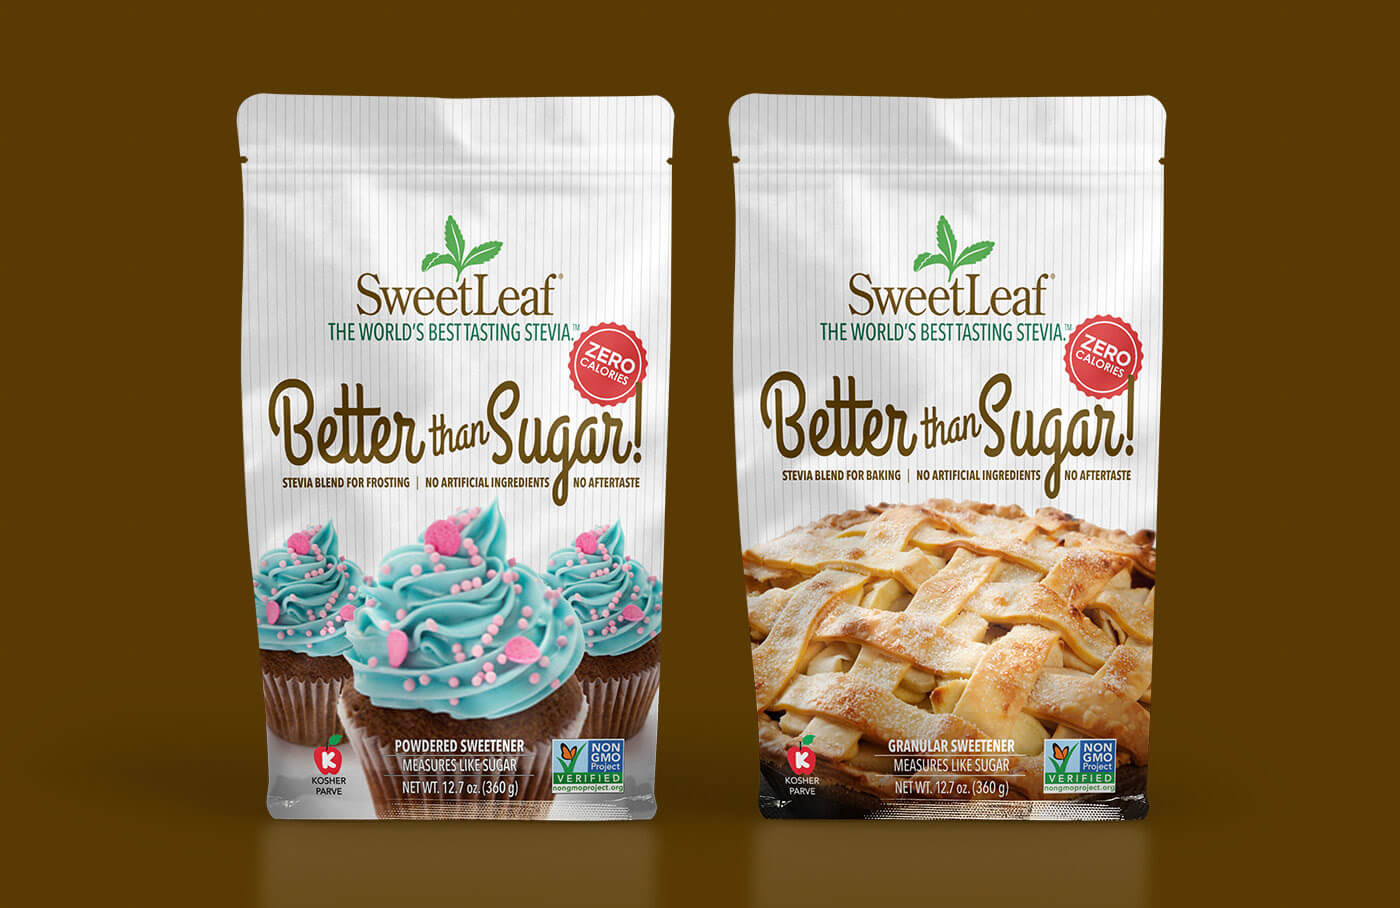 Better than Sugar package design by Michael Pitzer (Advertising & Design)